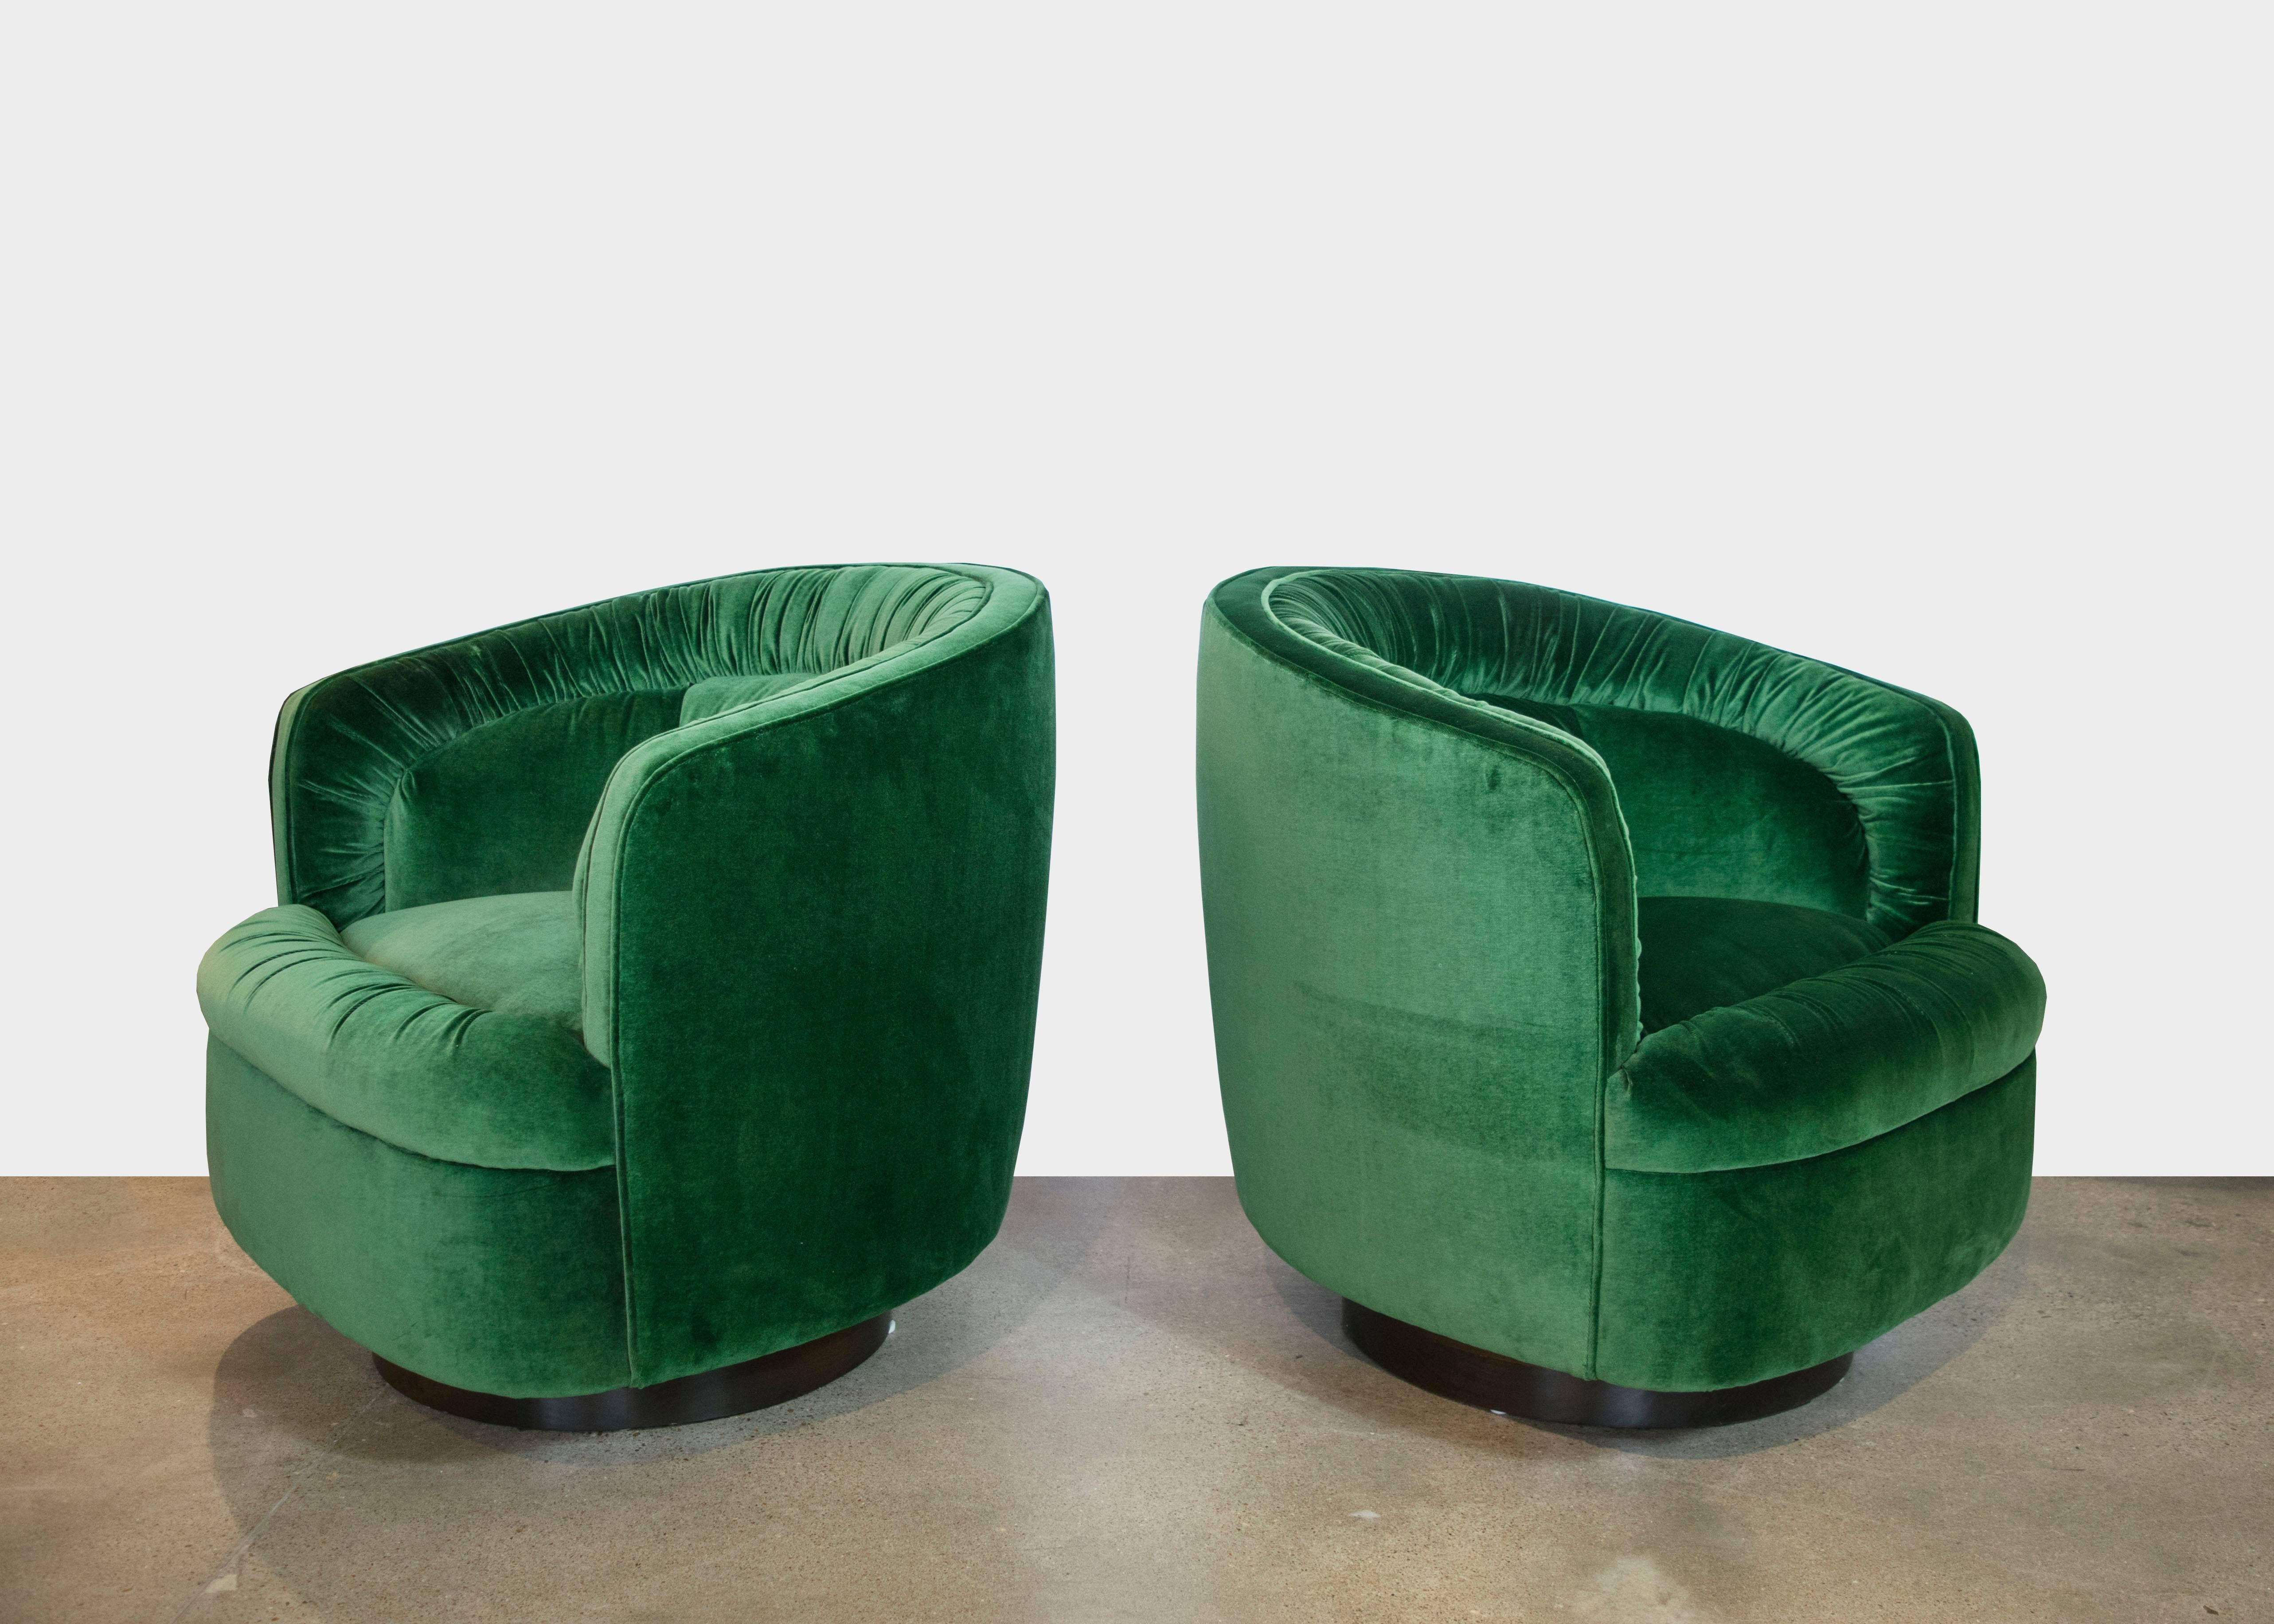 Extremely plush and elegant emerald green velvet swivel chairs with dark brown wooden bases. The chairs have ruched tufting and they swivel a full 360 degrees.